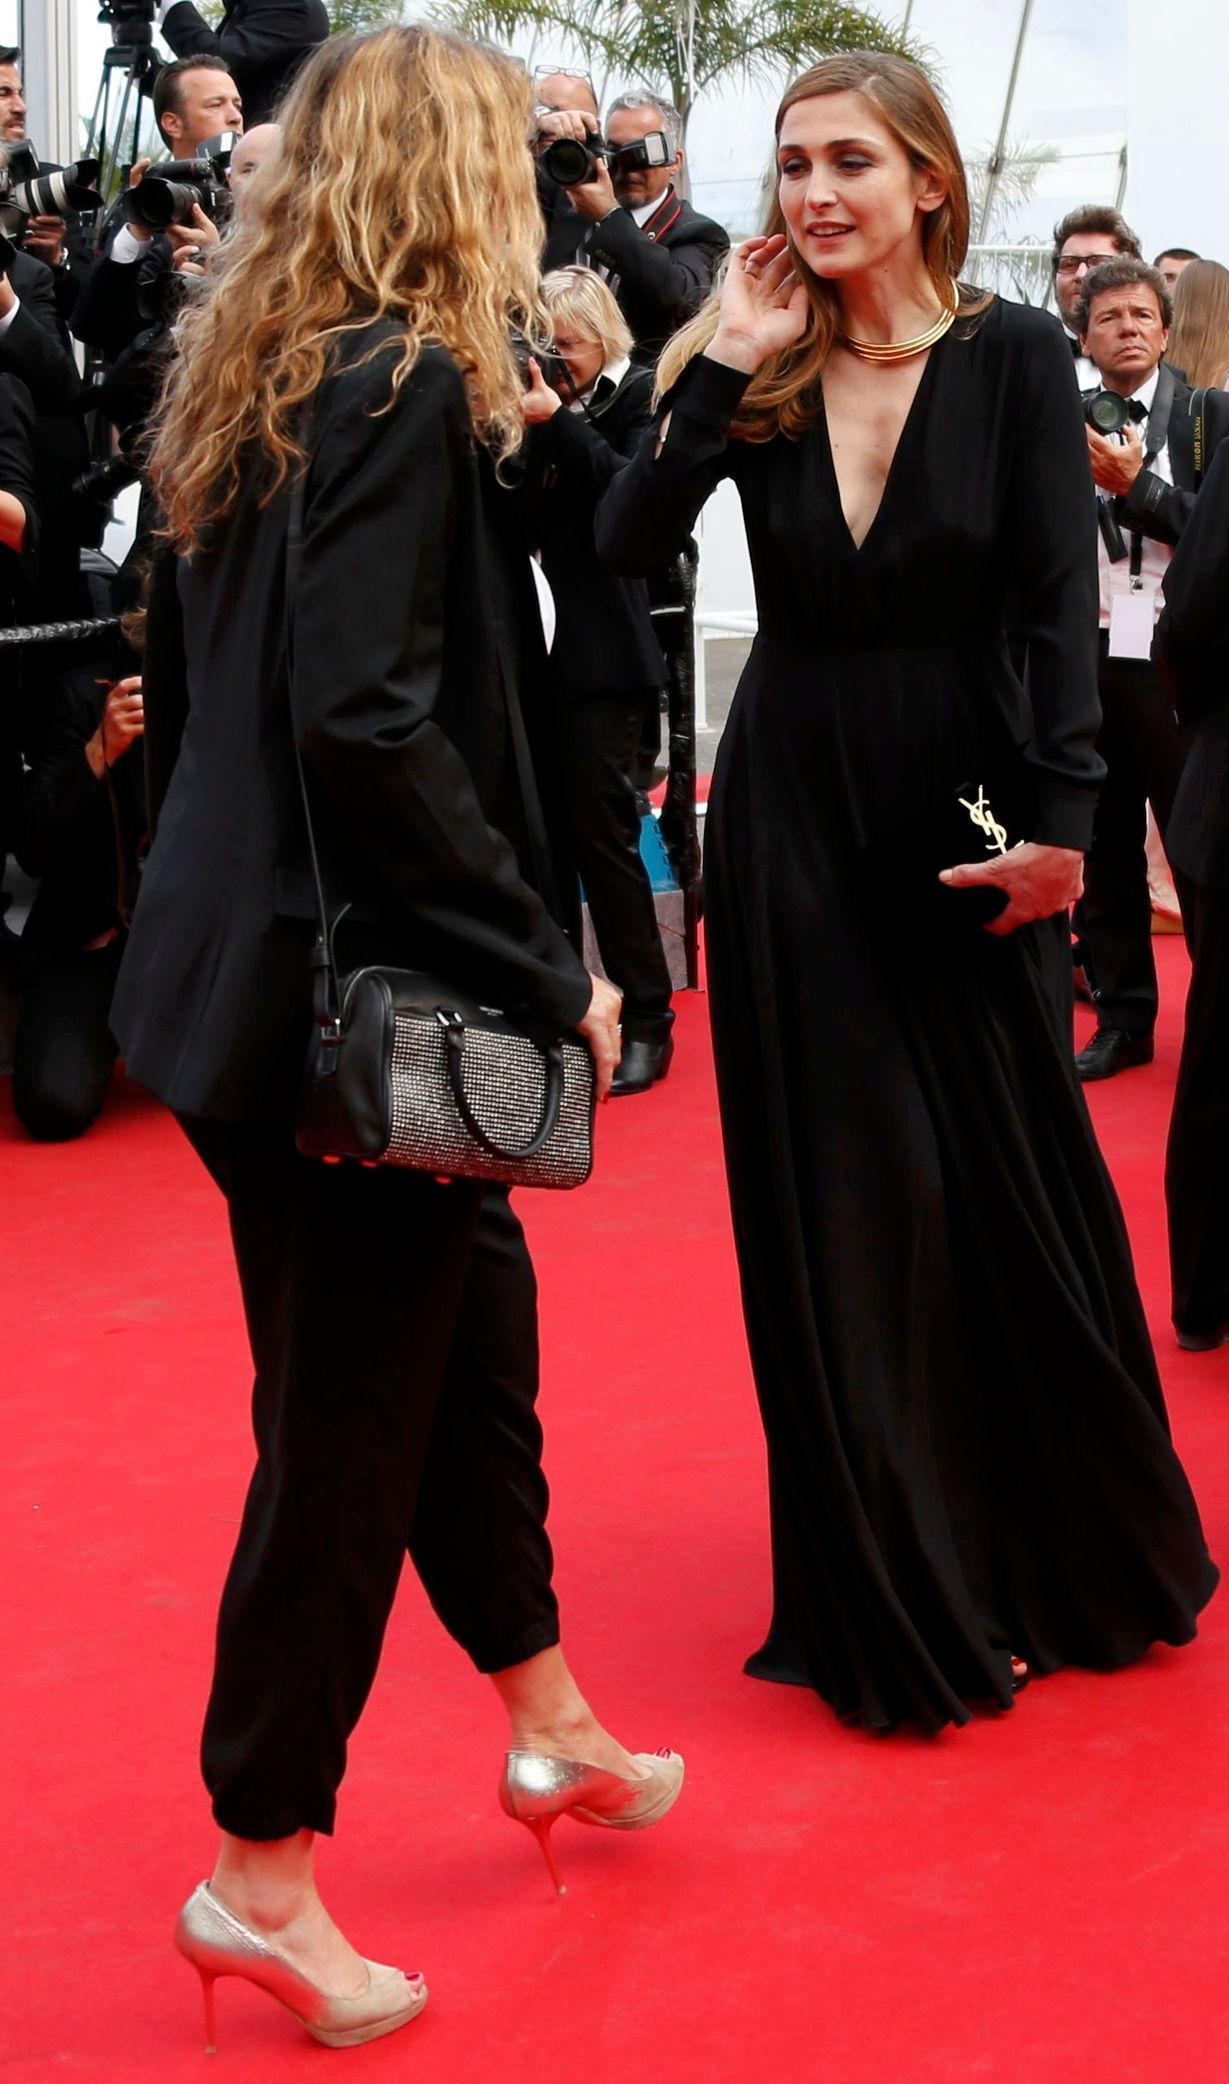 Actress Julie Gayet and director Lisa Azuelos pose on the red carpet at the 67th Cannes Film Festival in Cannes